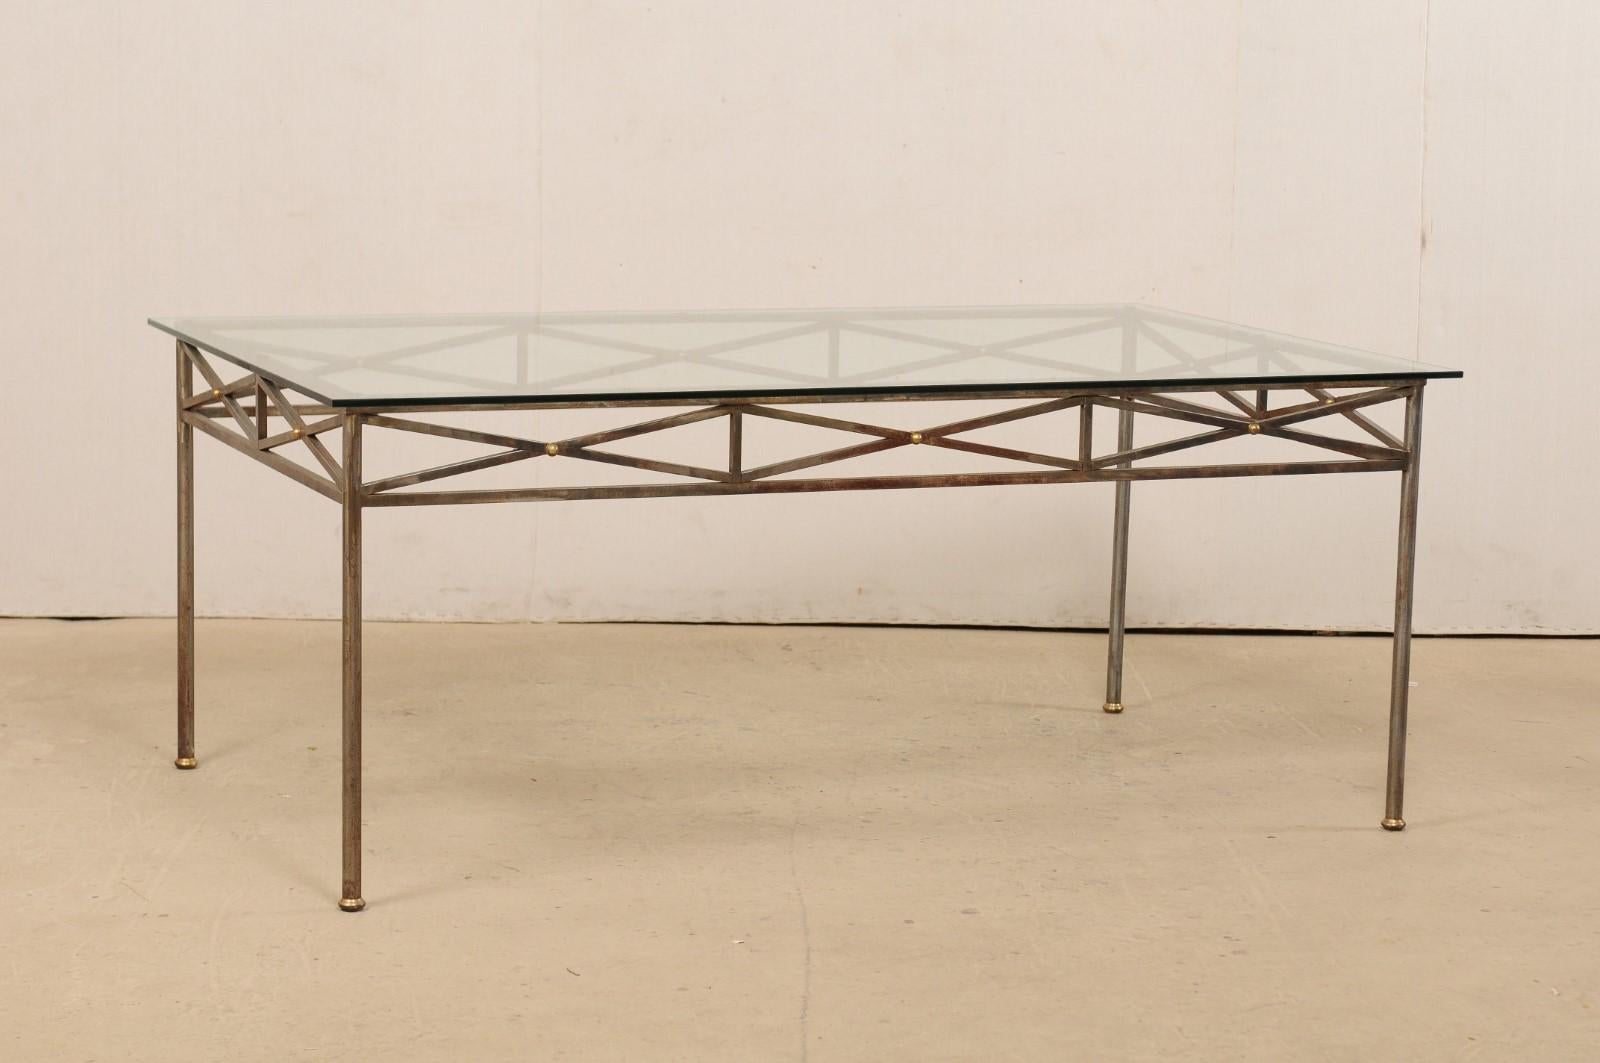 An American-made rectangular-shaped glass top table from the late 20th century. This vintage table has a neoclassical inspired design, with metal skirt comprised of an open, X-shaped pattern with petite brass ball accents at each crossing center.